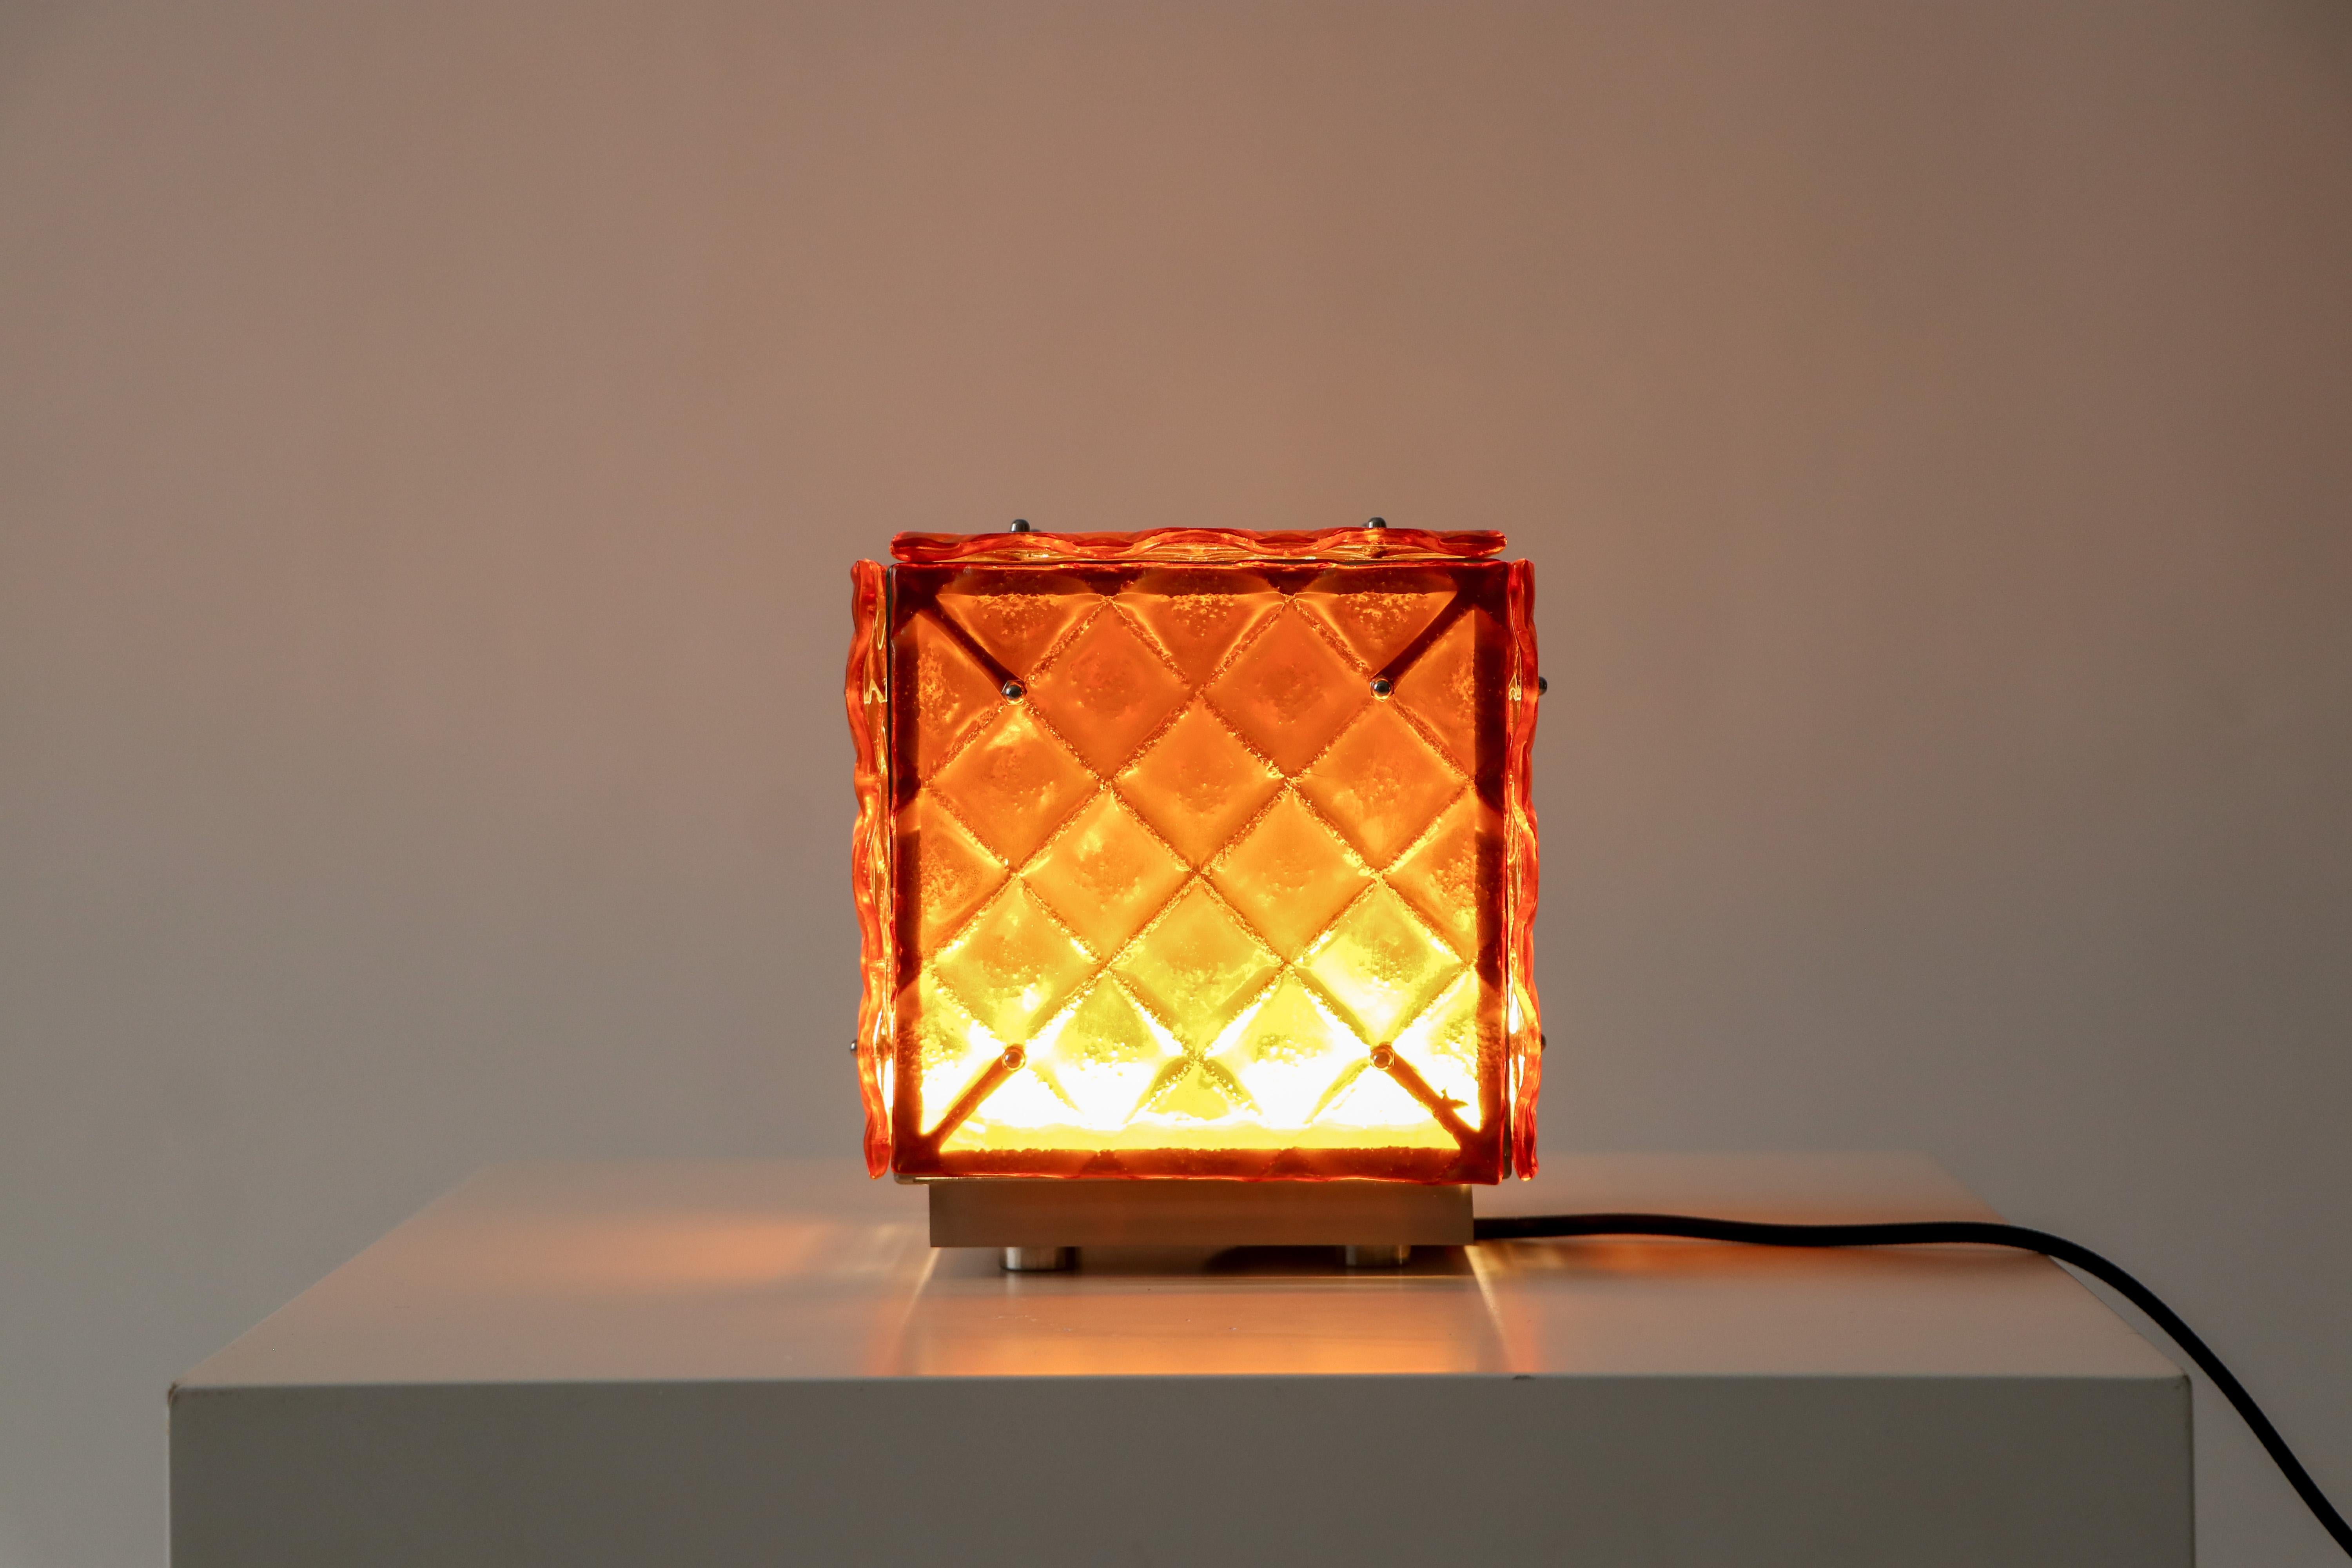 Metal Contemporary Functional Art Ambient Orange Light Artisanal Fused Glass For Sale